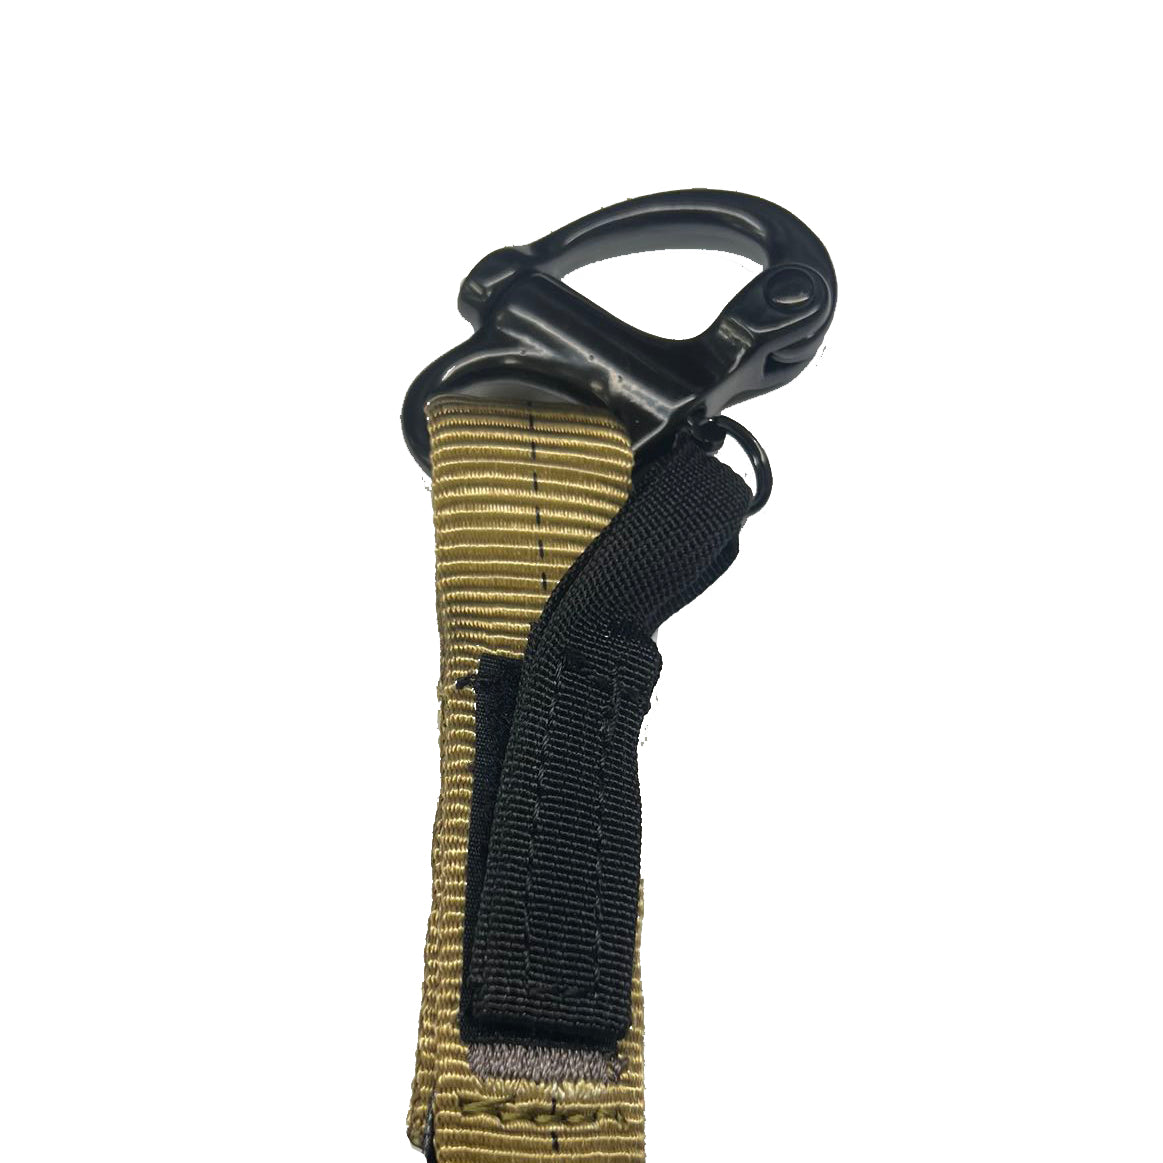 Helo Retention Lanyard CYB with Snap Hook and Shackle